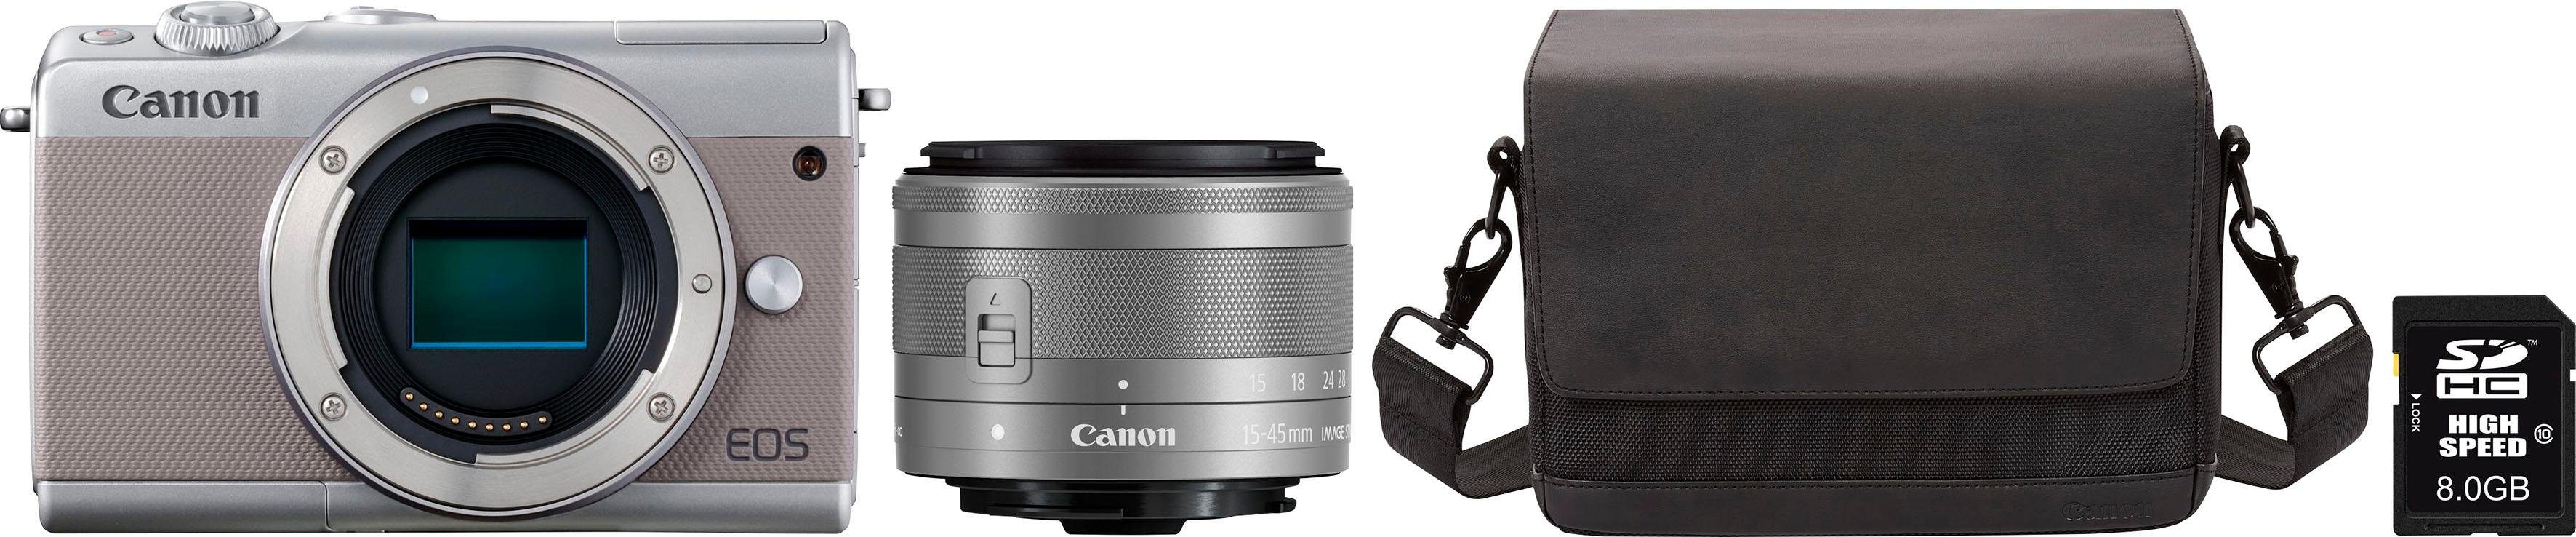 Canon Canon EOS-M100 15-45 mm IS systeemcamera (Canon EF-M 15-45 mm 1:3,5-6,3 IS STM, 24,2 MP, etc.)